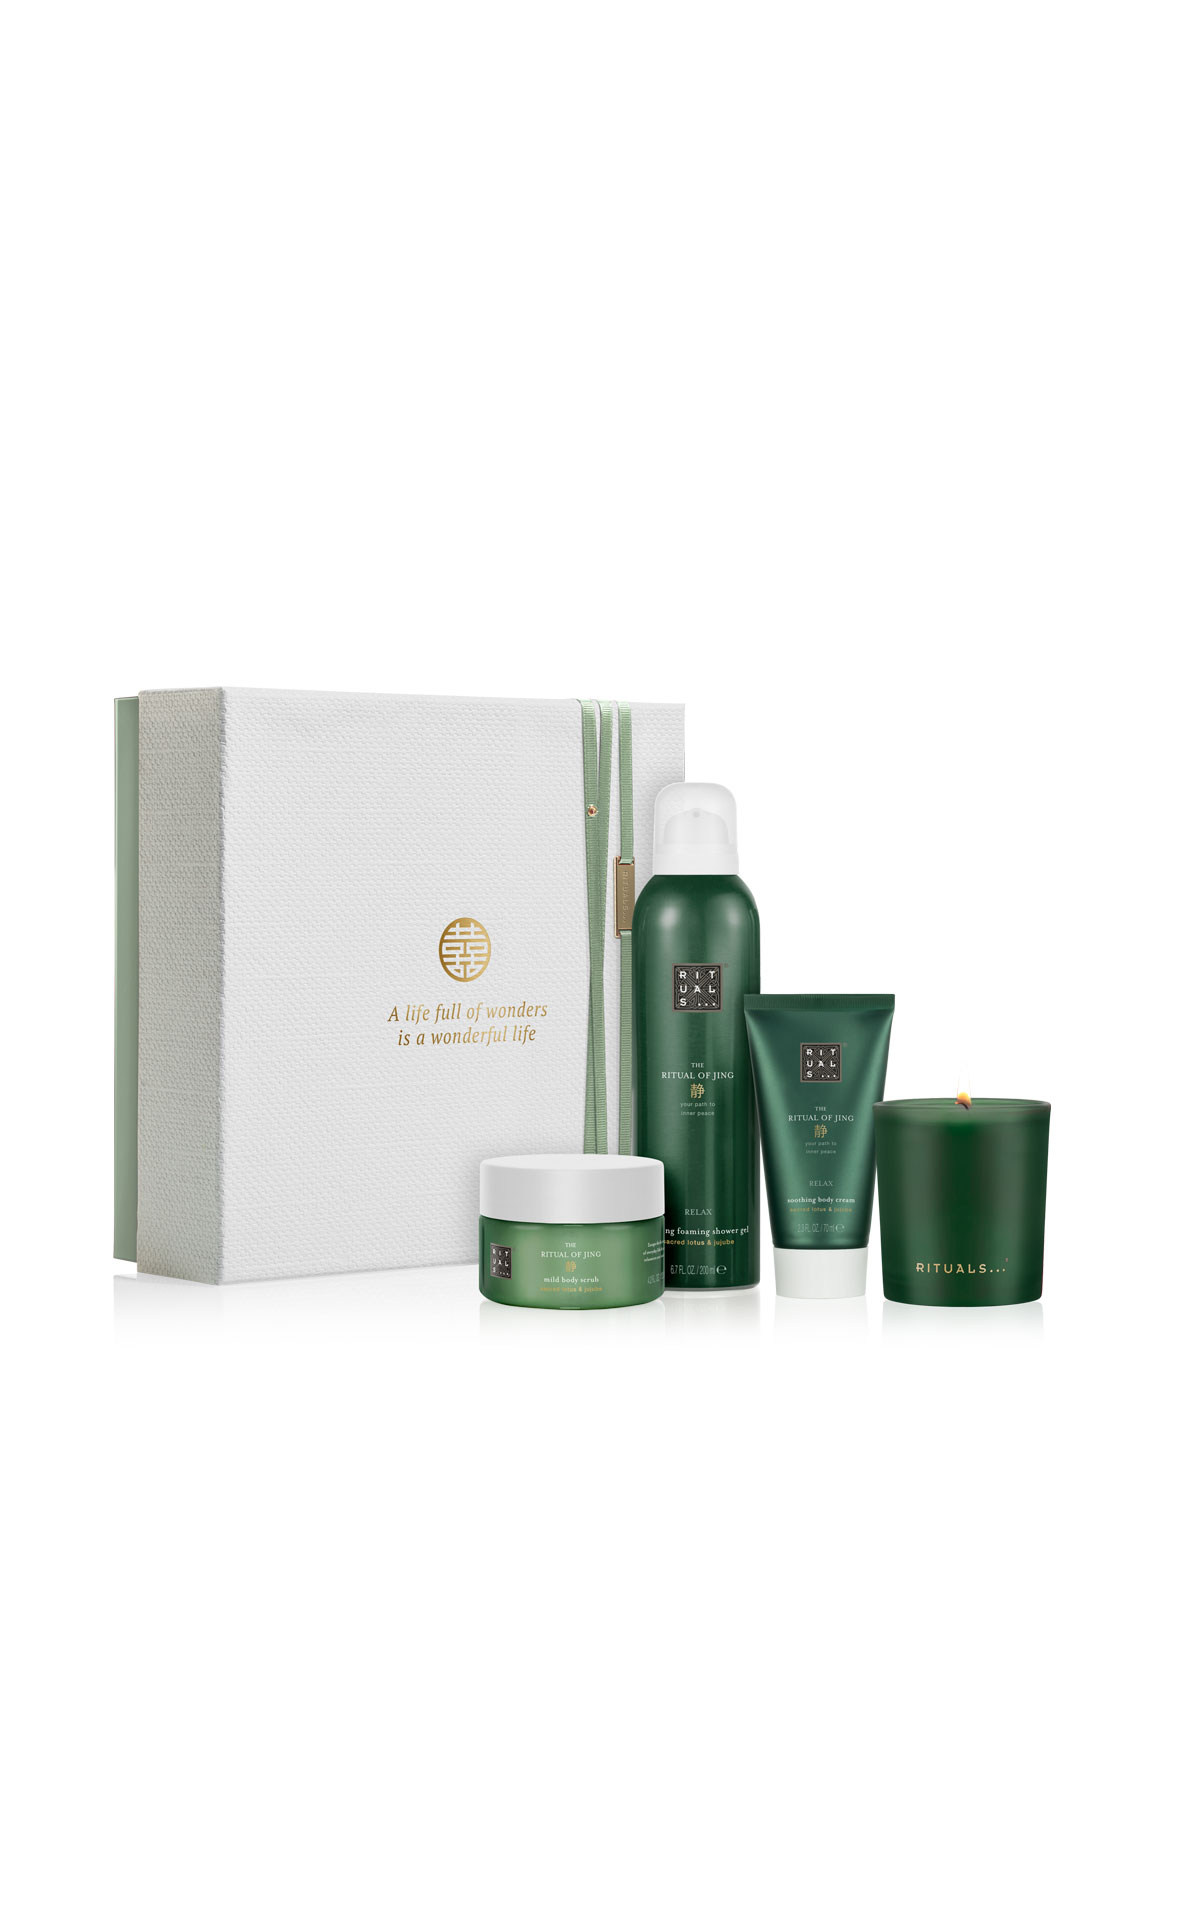 Rituals The ritual of jing giftset from Bicester Village